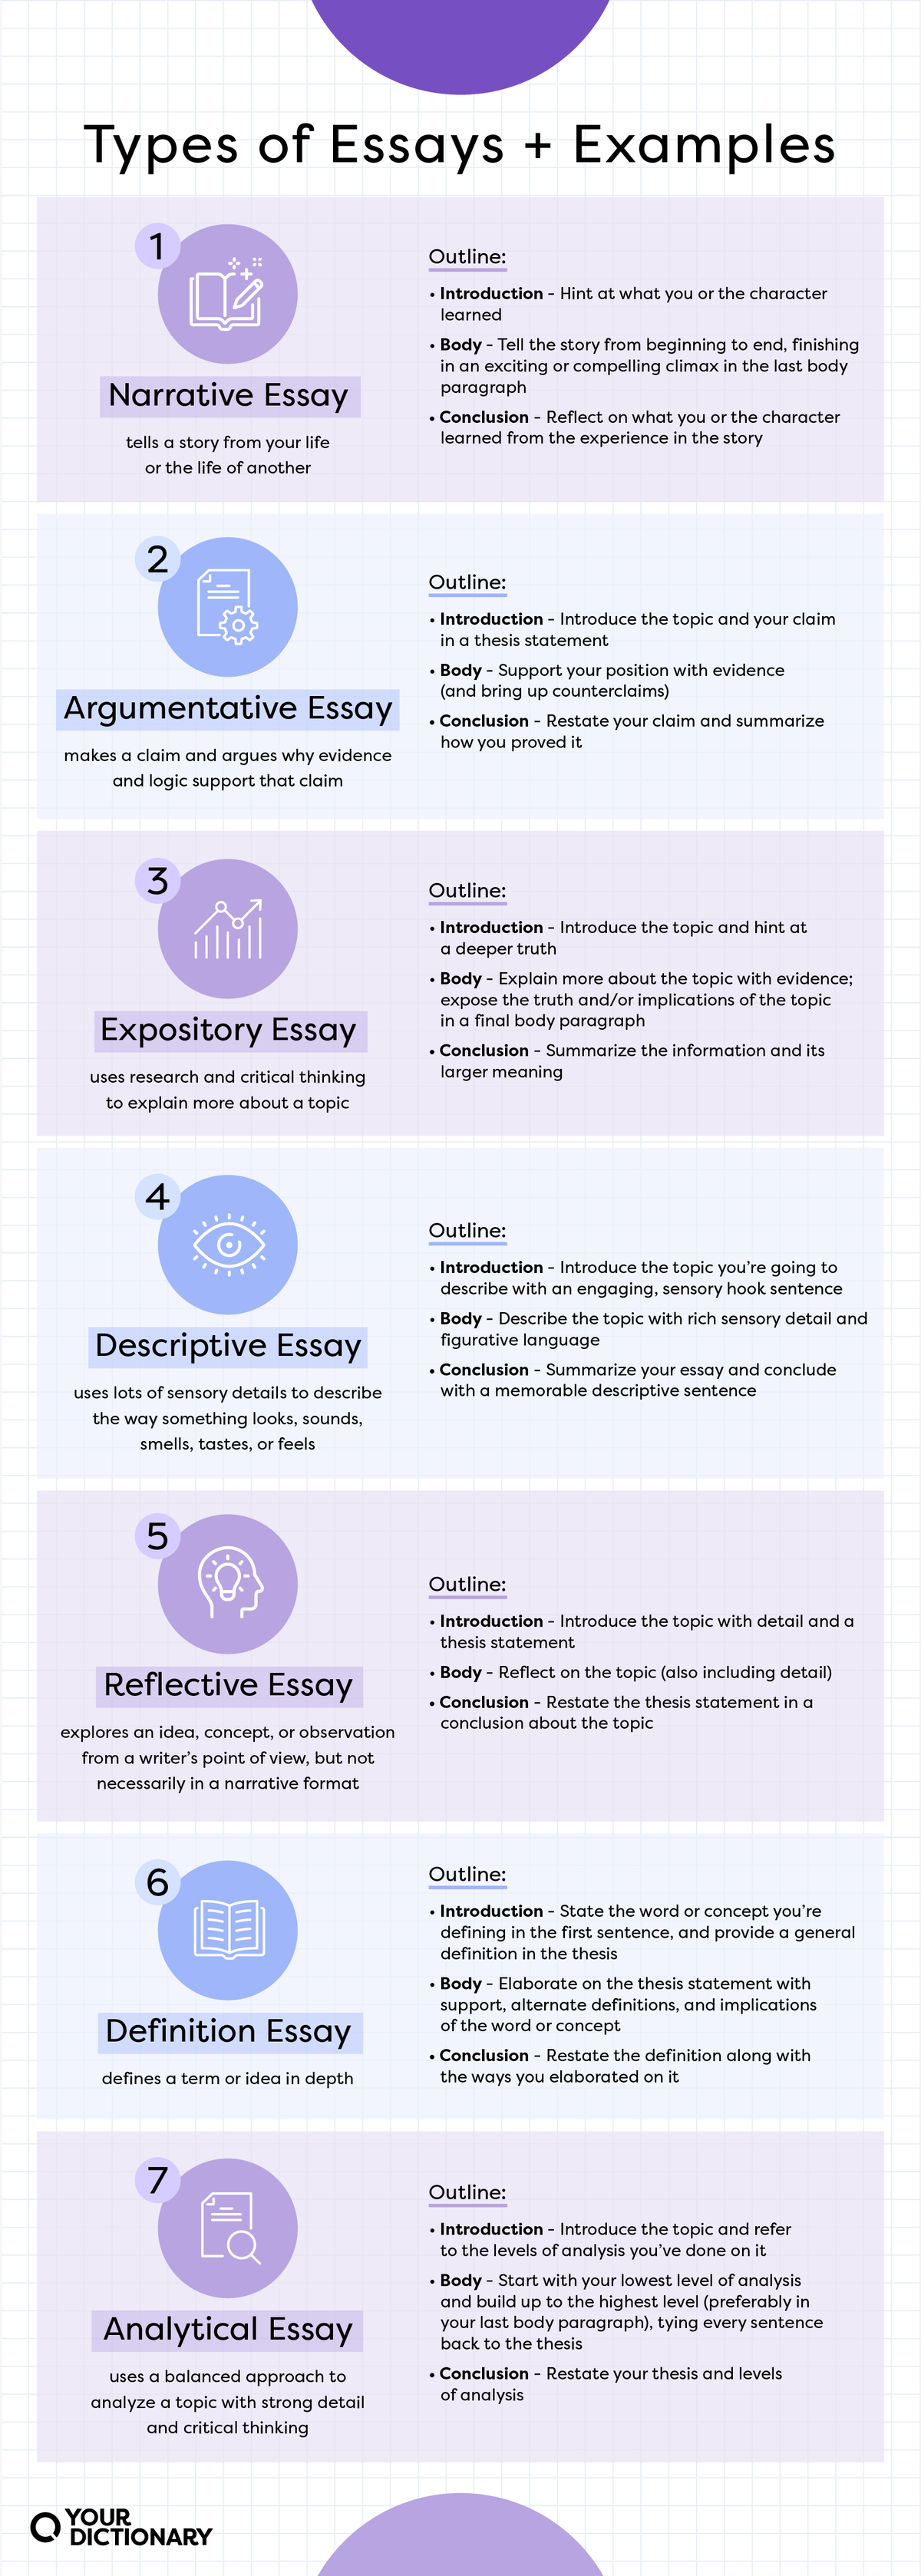 seven types of essays with definitions and outlines from the article in a chart